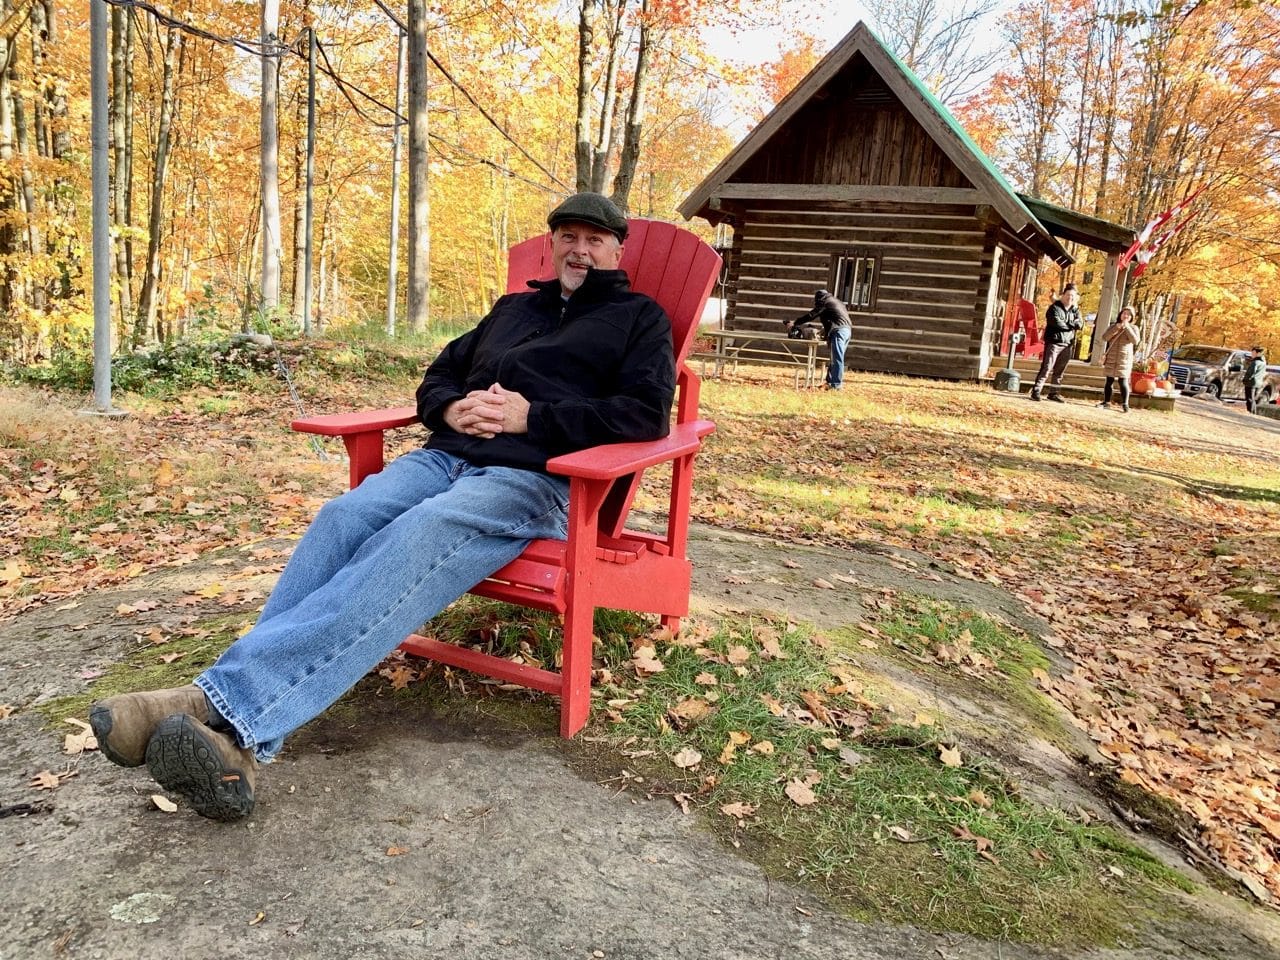 After hiking to Dorset Tower relax on a Muskoka Chair or visit the log cabin gift shop.